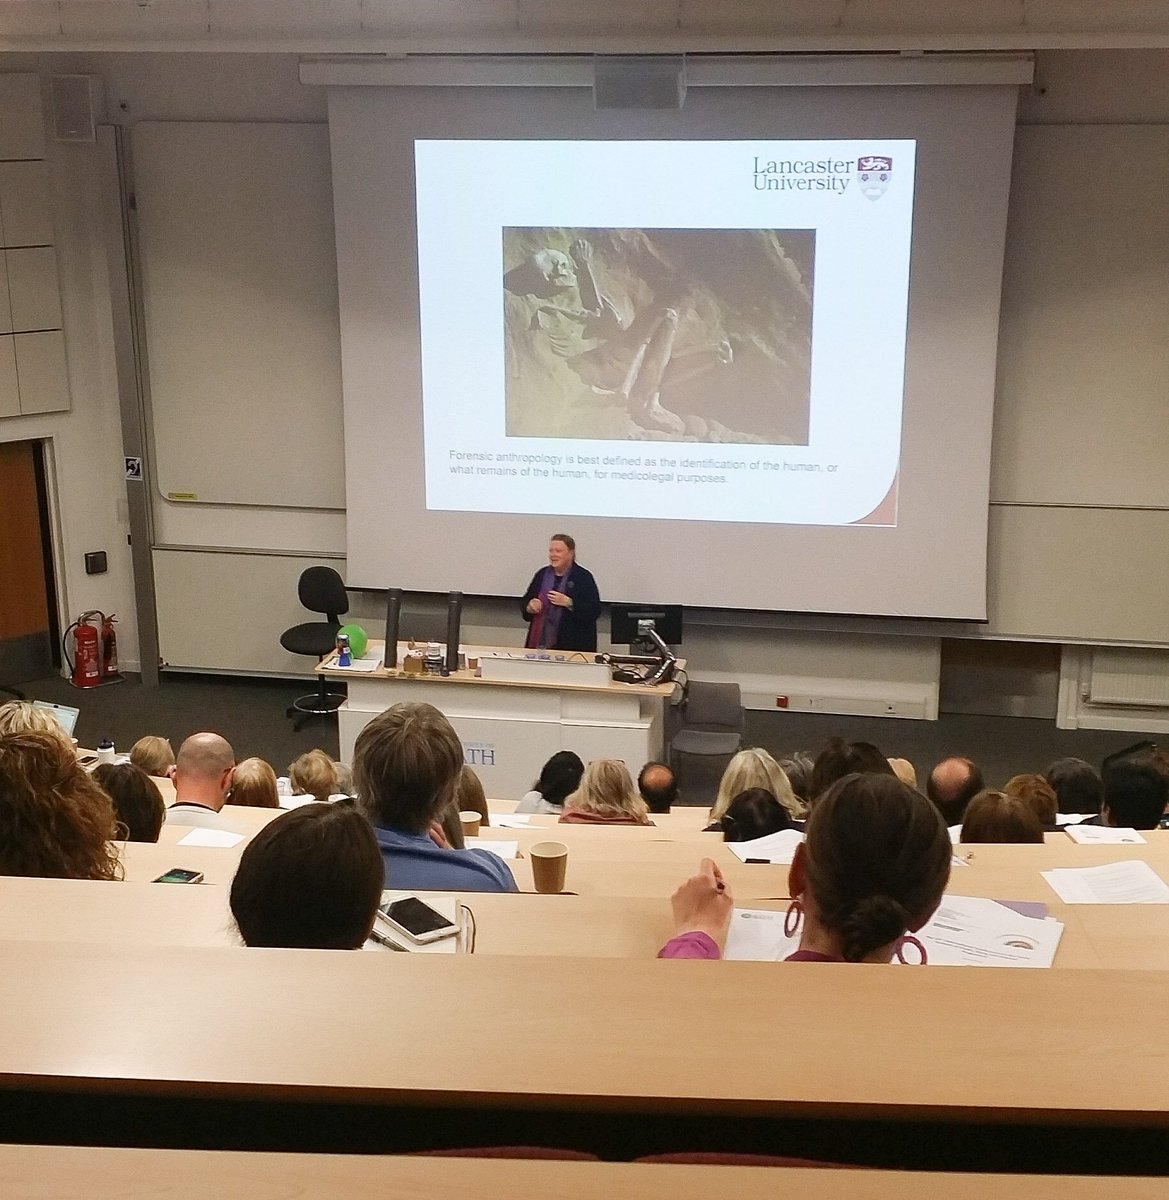 So utterly delighted to be listening to Professor Dame Sue Black's opening plenary. What a remarkable and engaging woman! #DDD14 @cendeathsociety #cdas #forensicanthropology